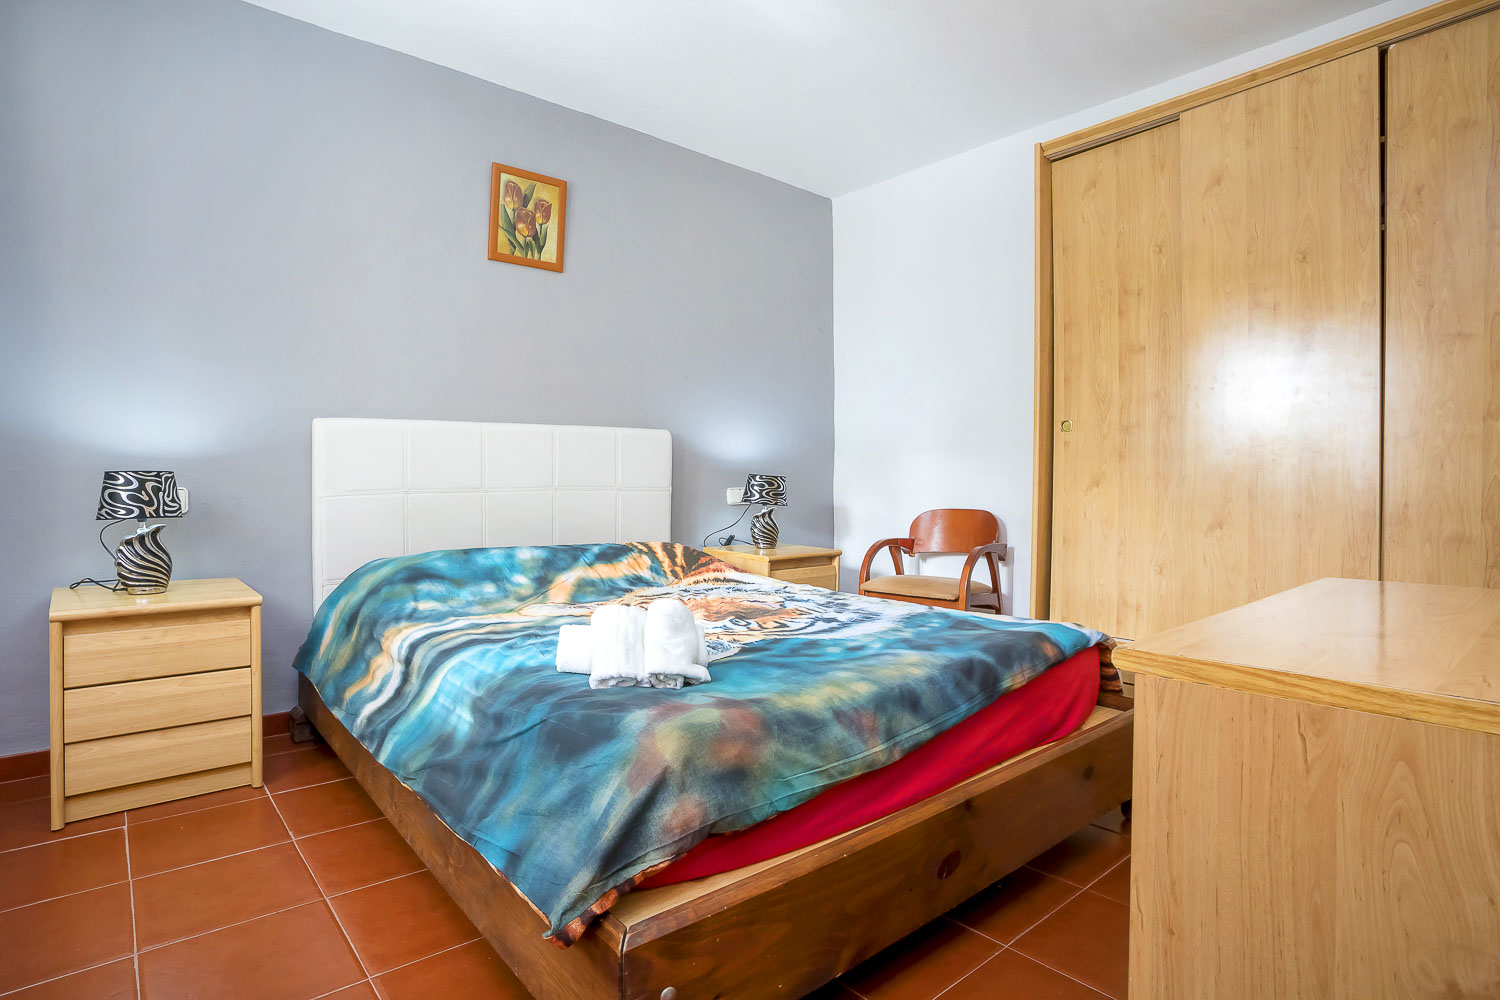 Double bed room in a house of Ibiza